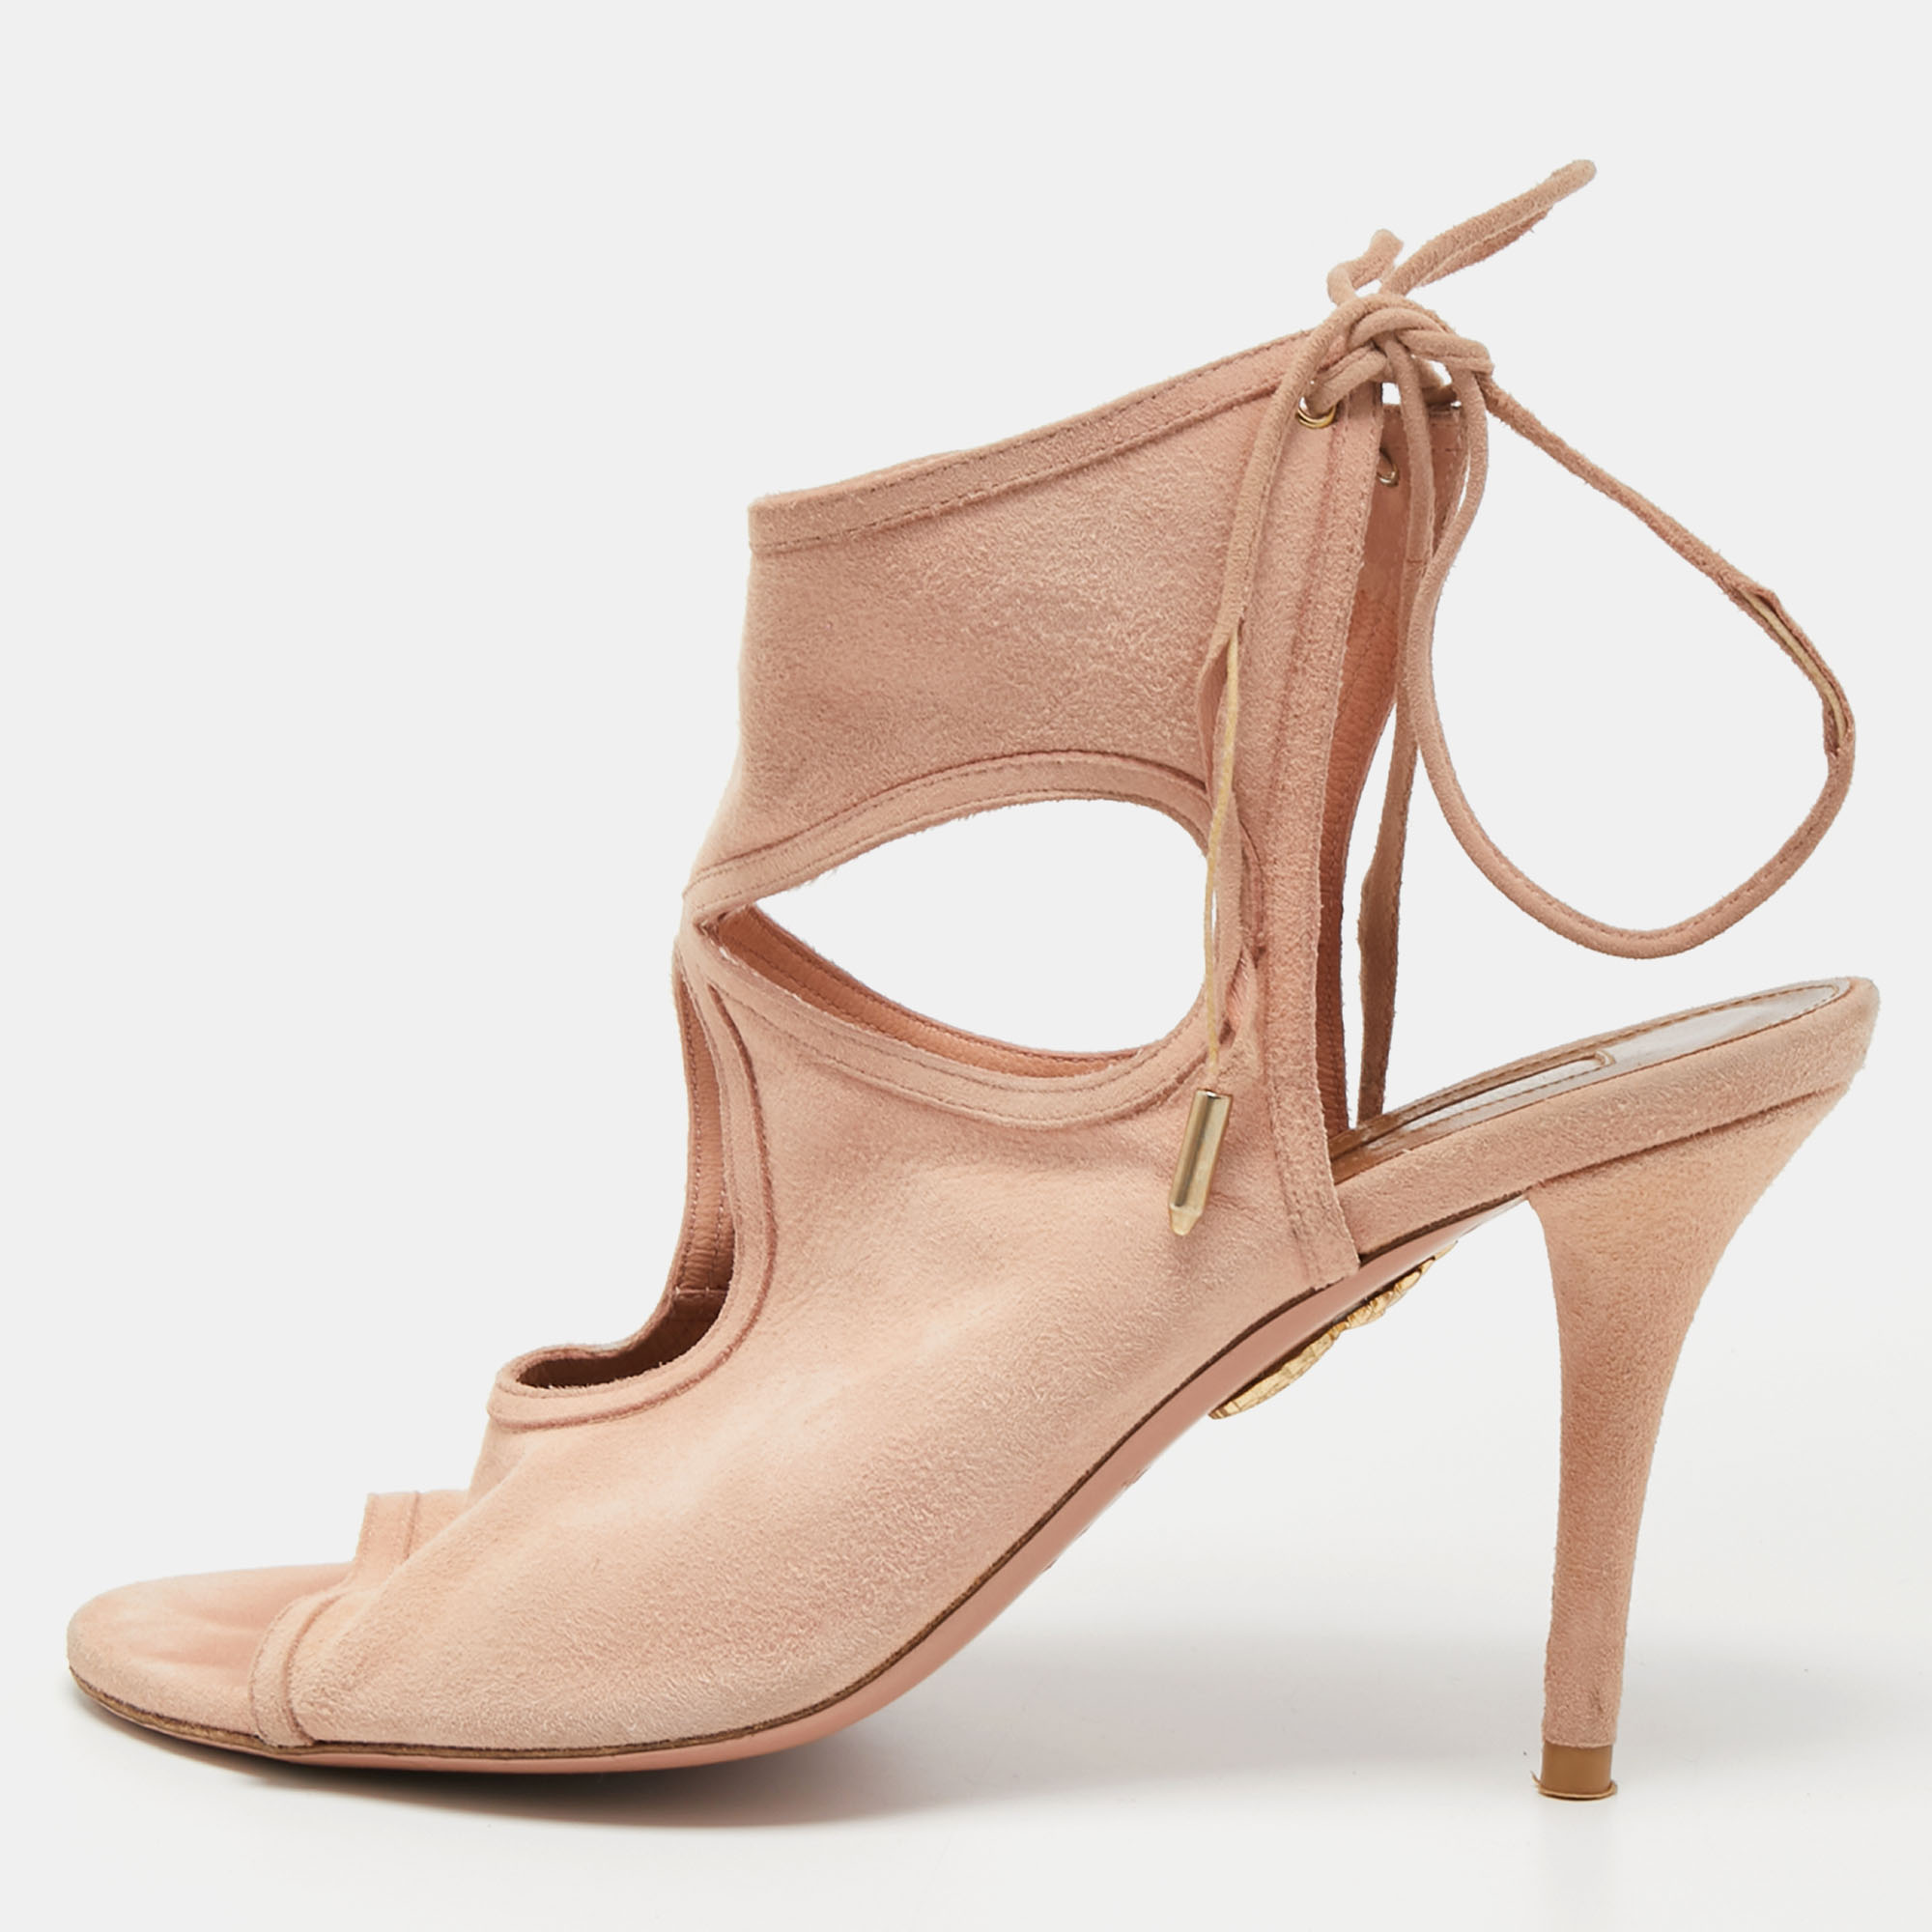 With these Aquazzura sandals comfort and style are guaranteed. Crafted using suede they feature a pink hue and rest on durable soles.